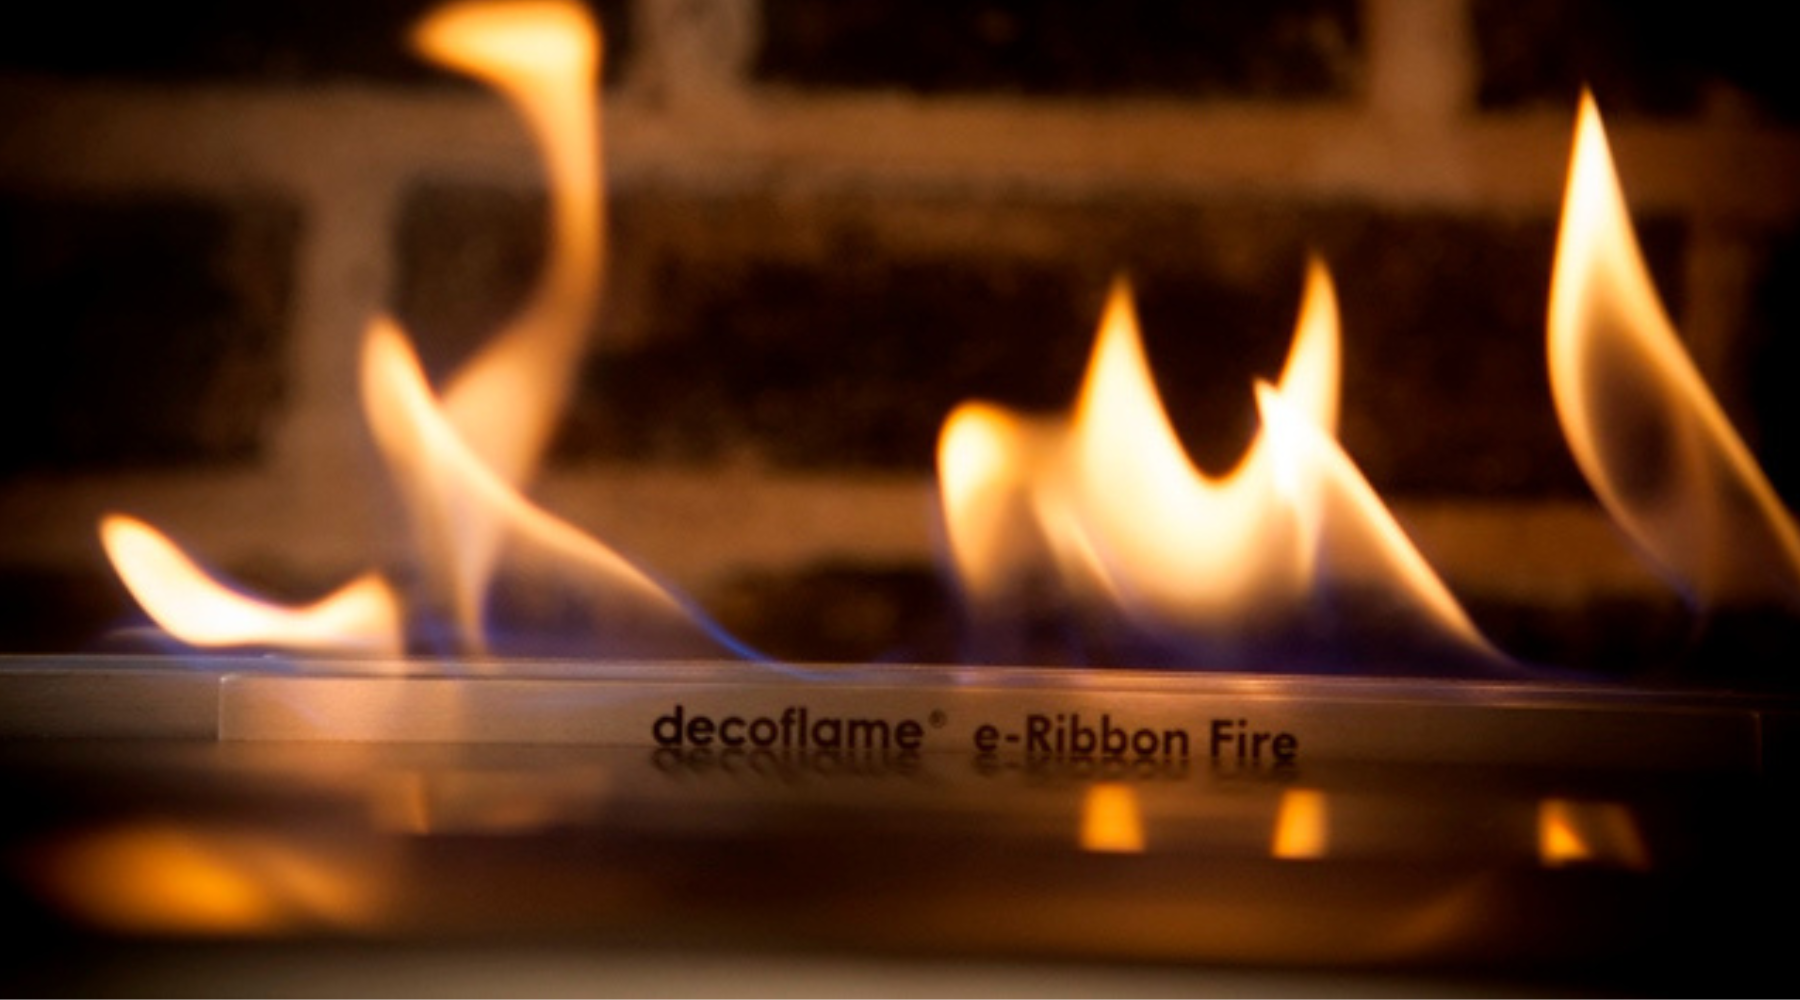  Decoflame Ethanol Fireplaces: Everything To Know About Europes Premium Brand